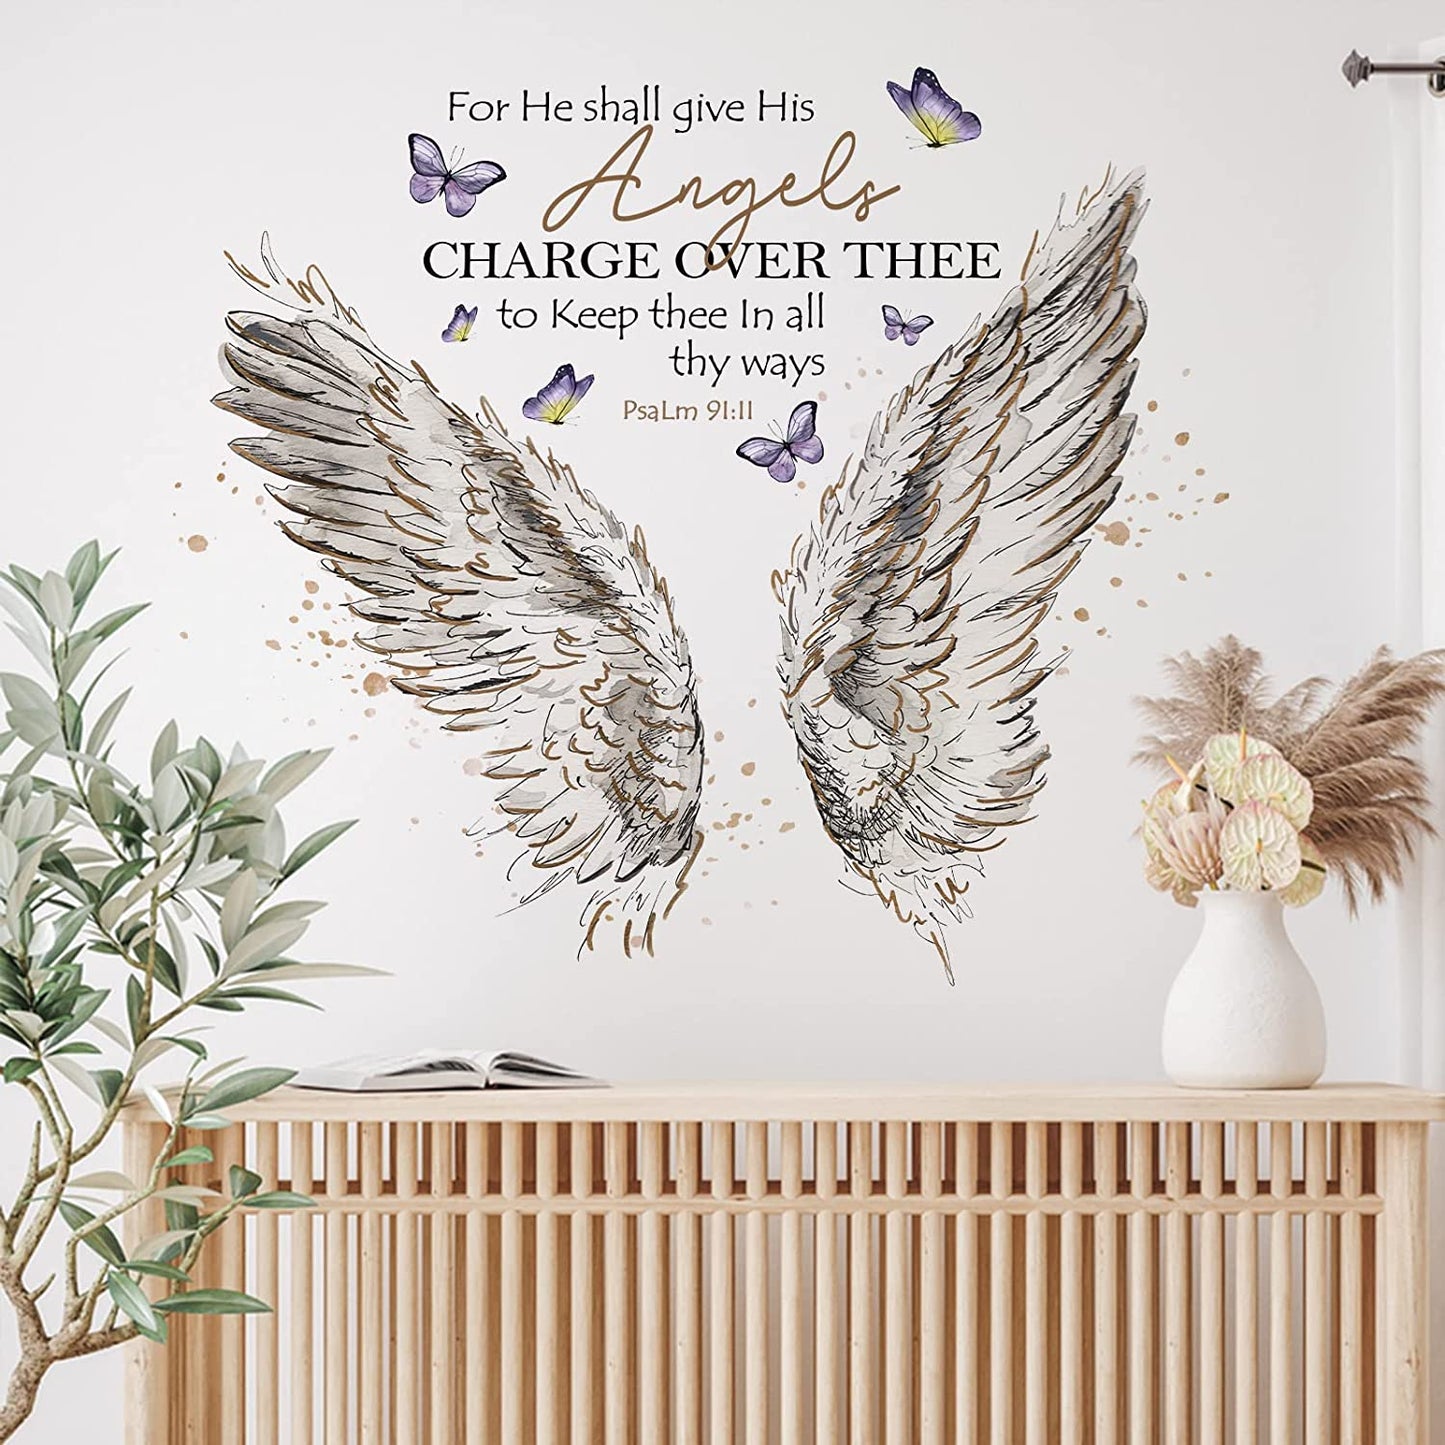 Wall Decals Stickers, Religious Wings Bible Verse Quote Home Bedroom Decor, Butterfly Living Room Kitchen Decorations Art